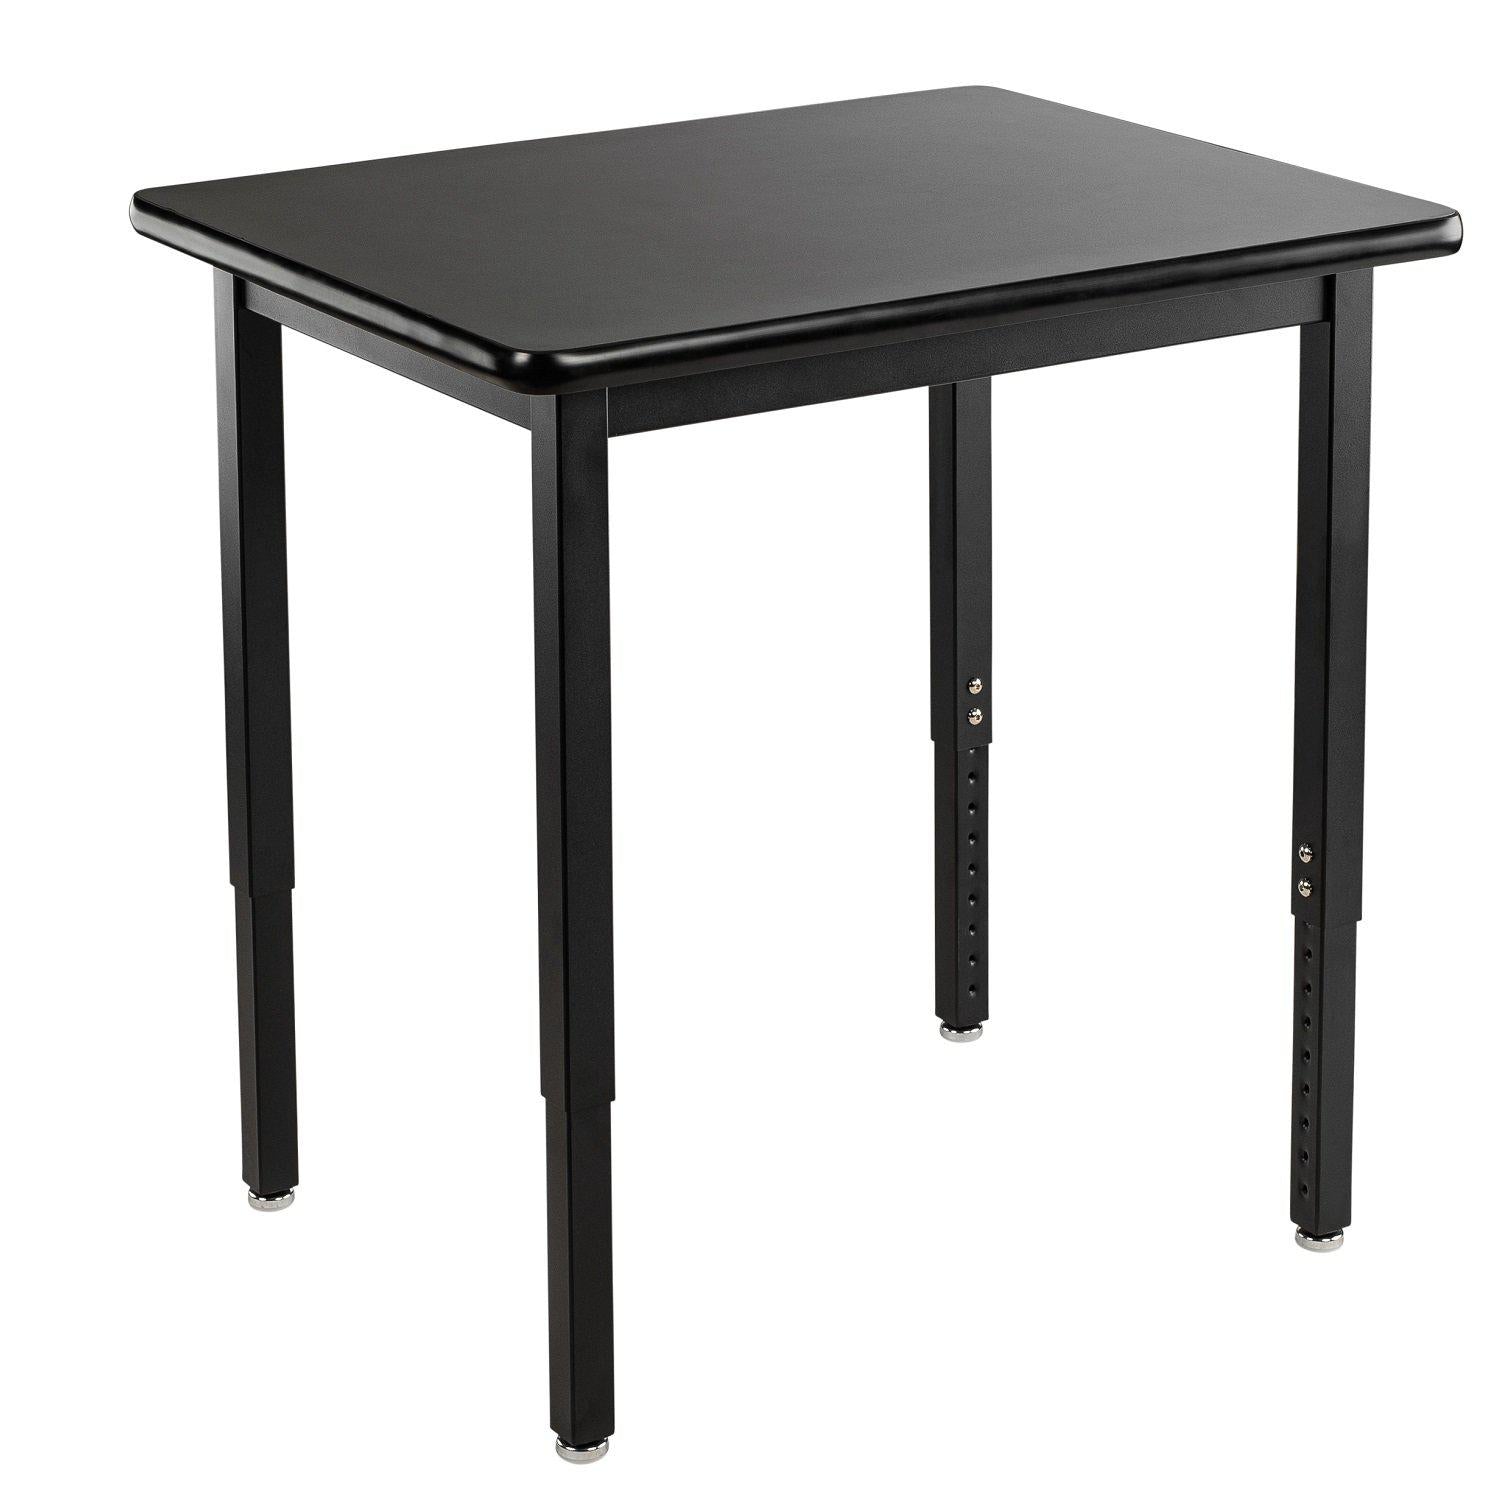 Heavy-Duty Height-Adjustable Utility Table, Black Frame, 24" x 24", High-Pressure Laminate Top with T-Mold Edge